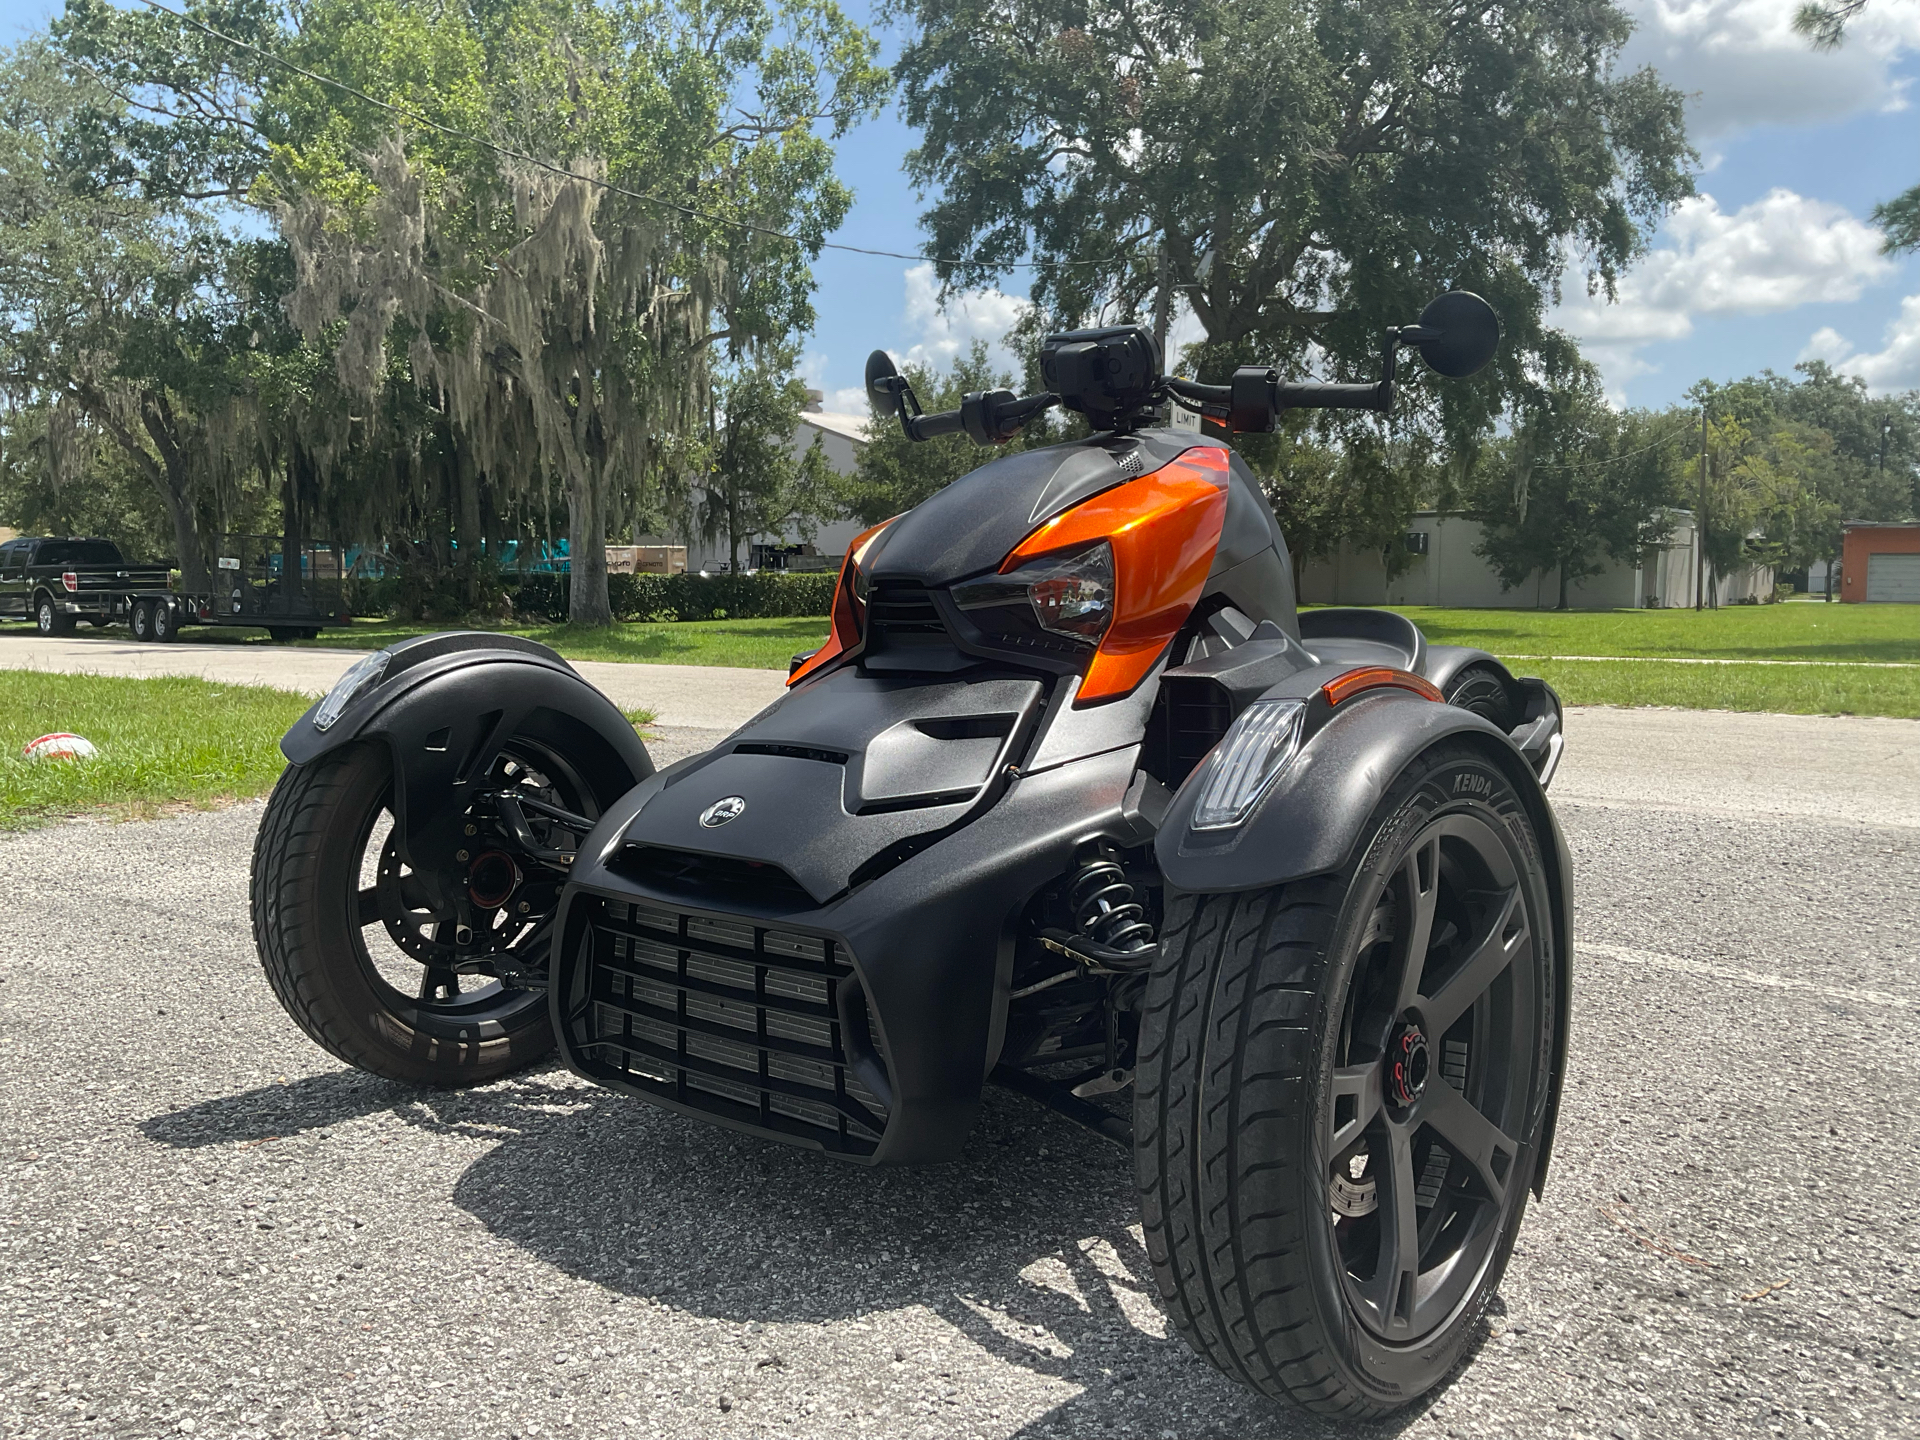 2020 Can-Am Ryker 600 ACE in Sanford, Florida - Photo 5